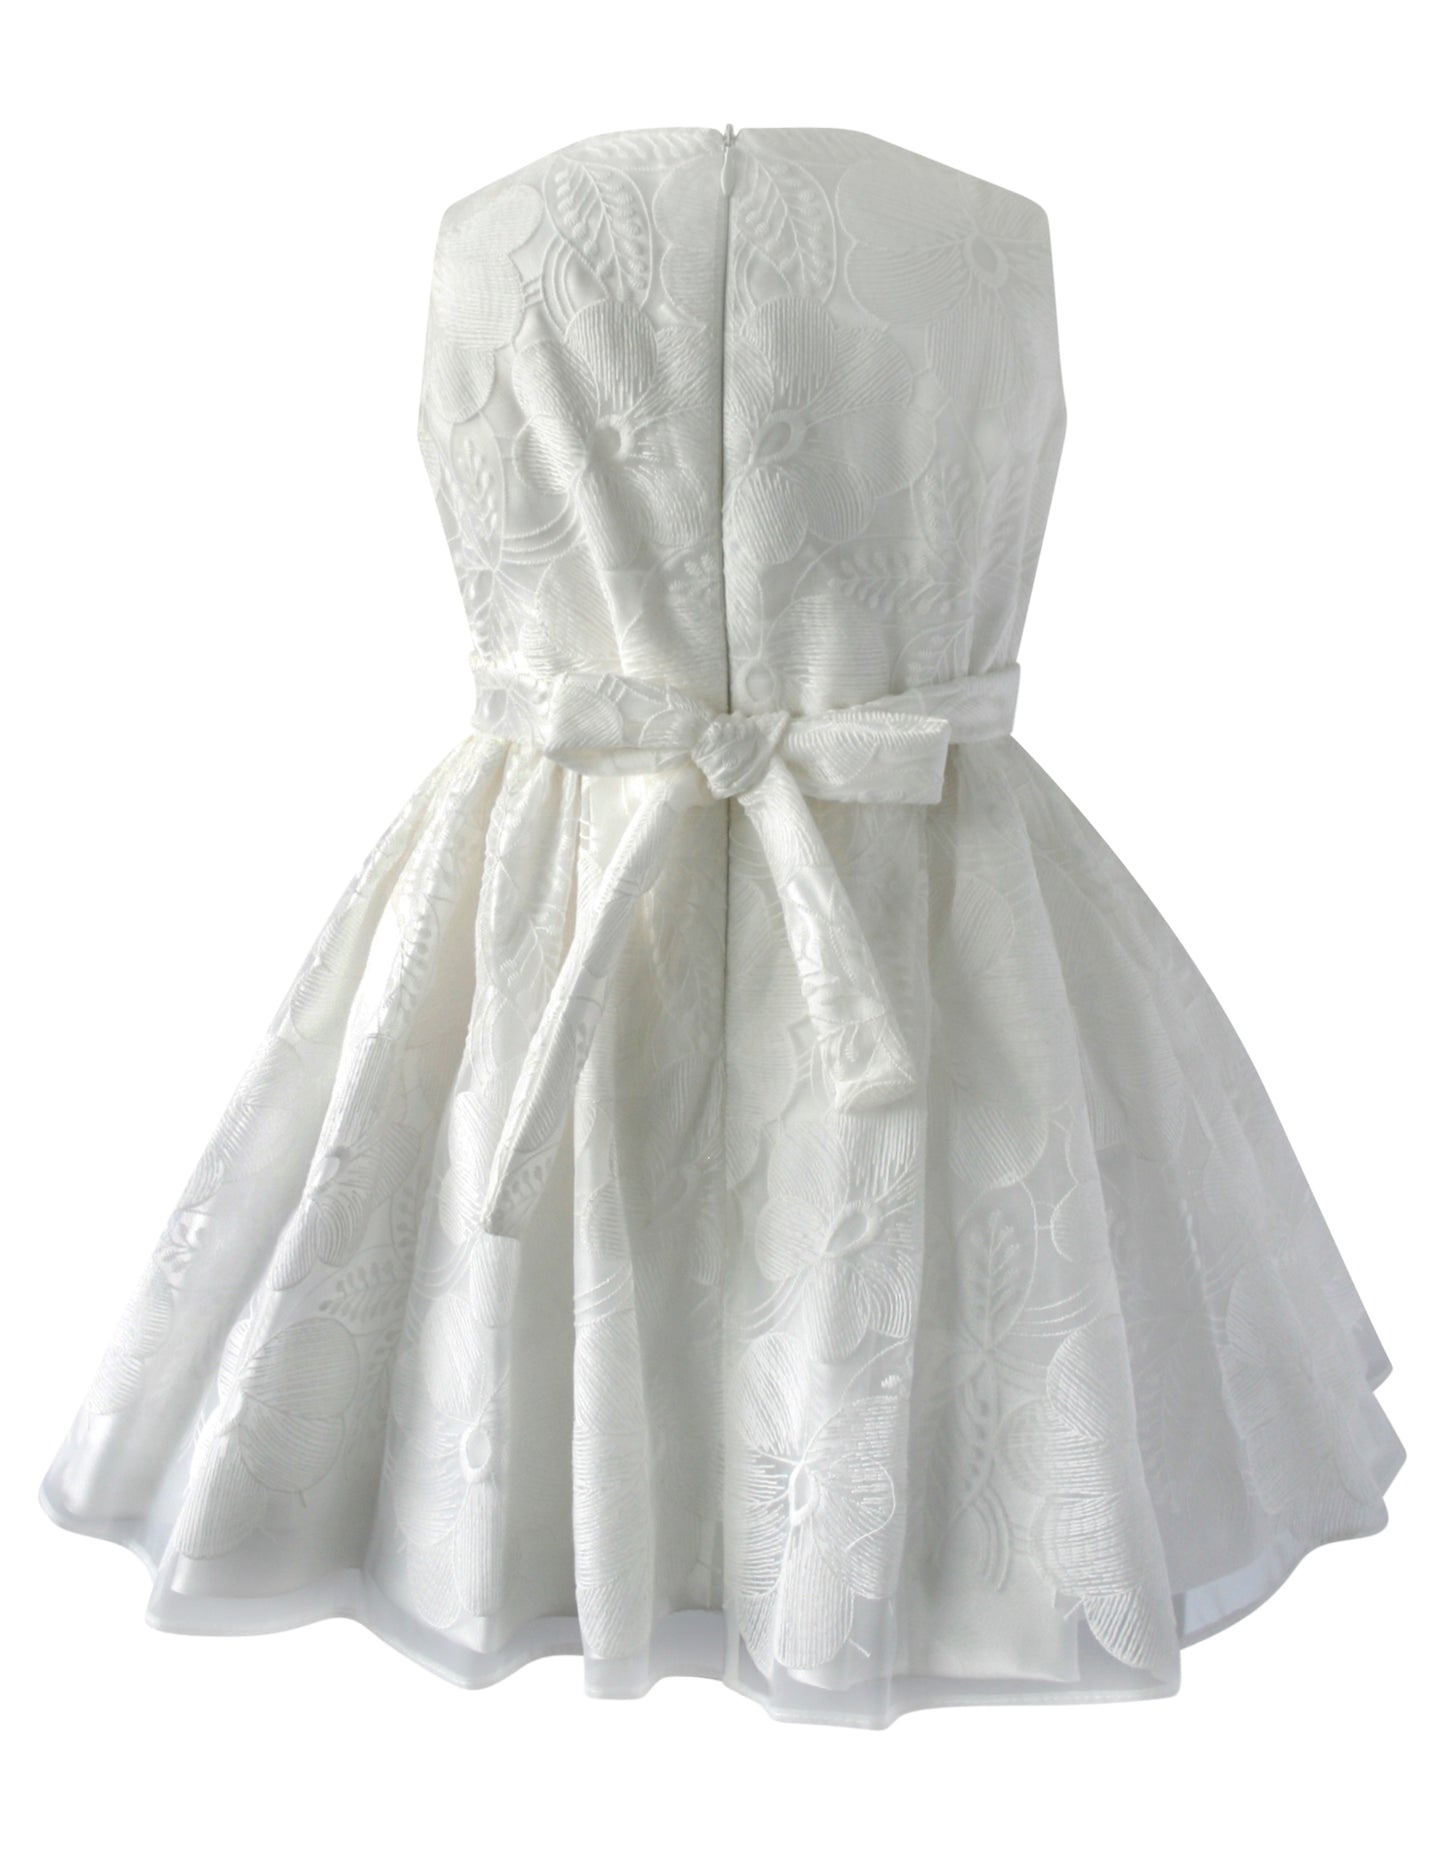 Helena and Harry Girl's White Side Bow Dress